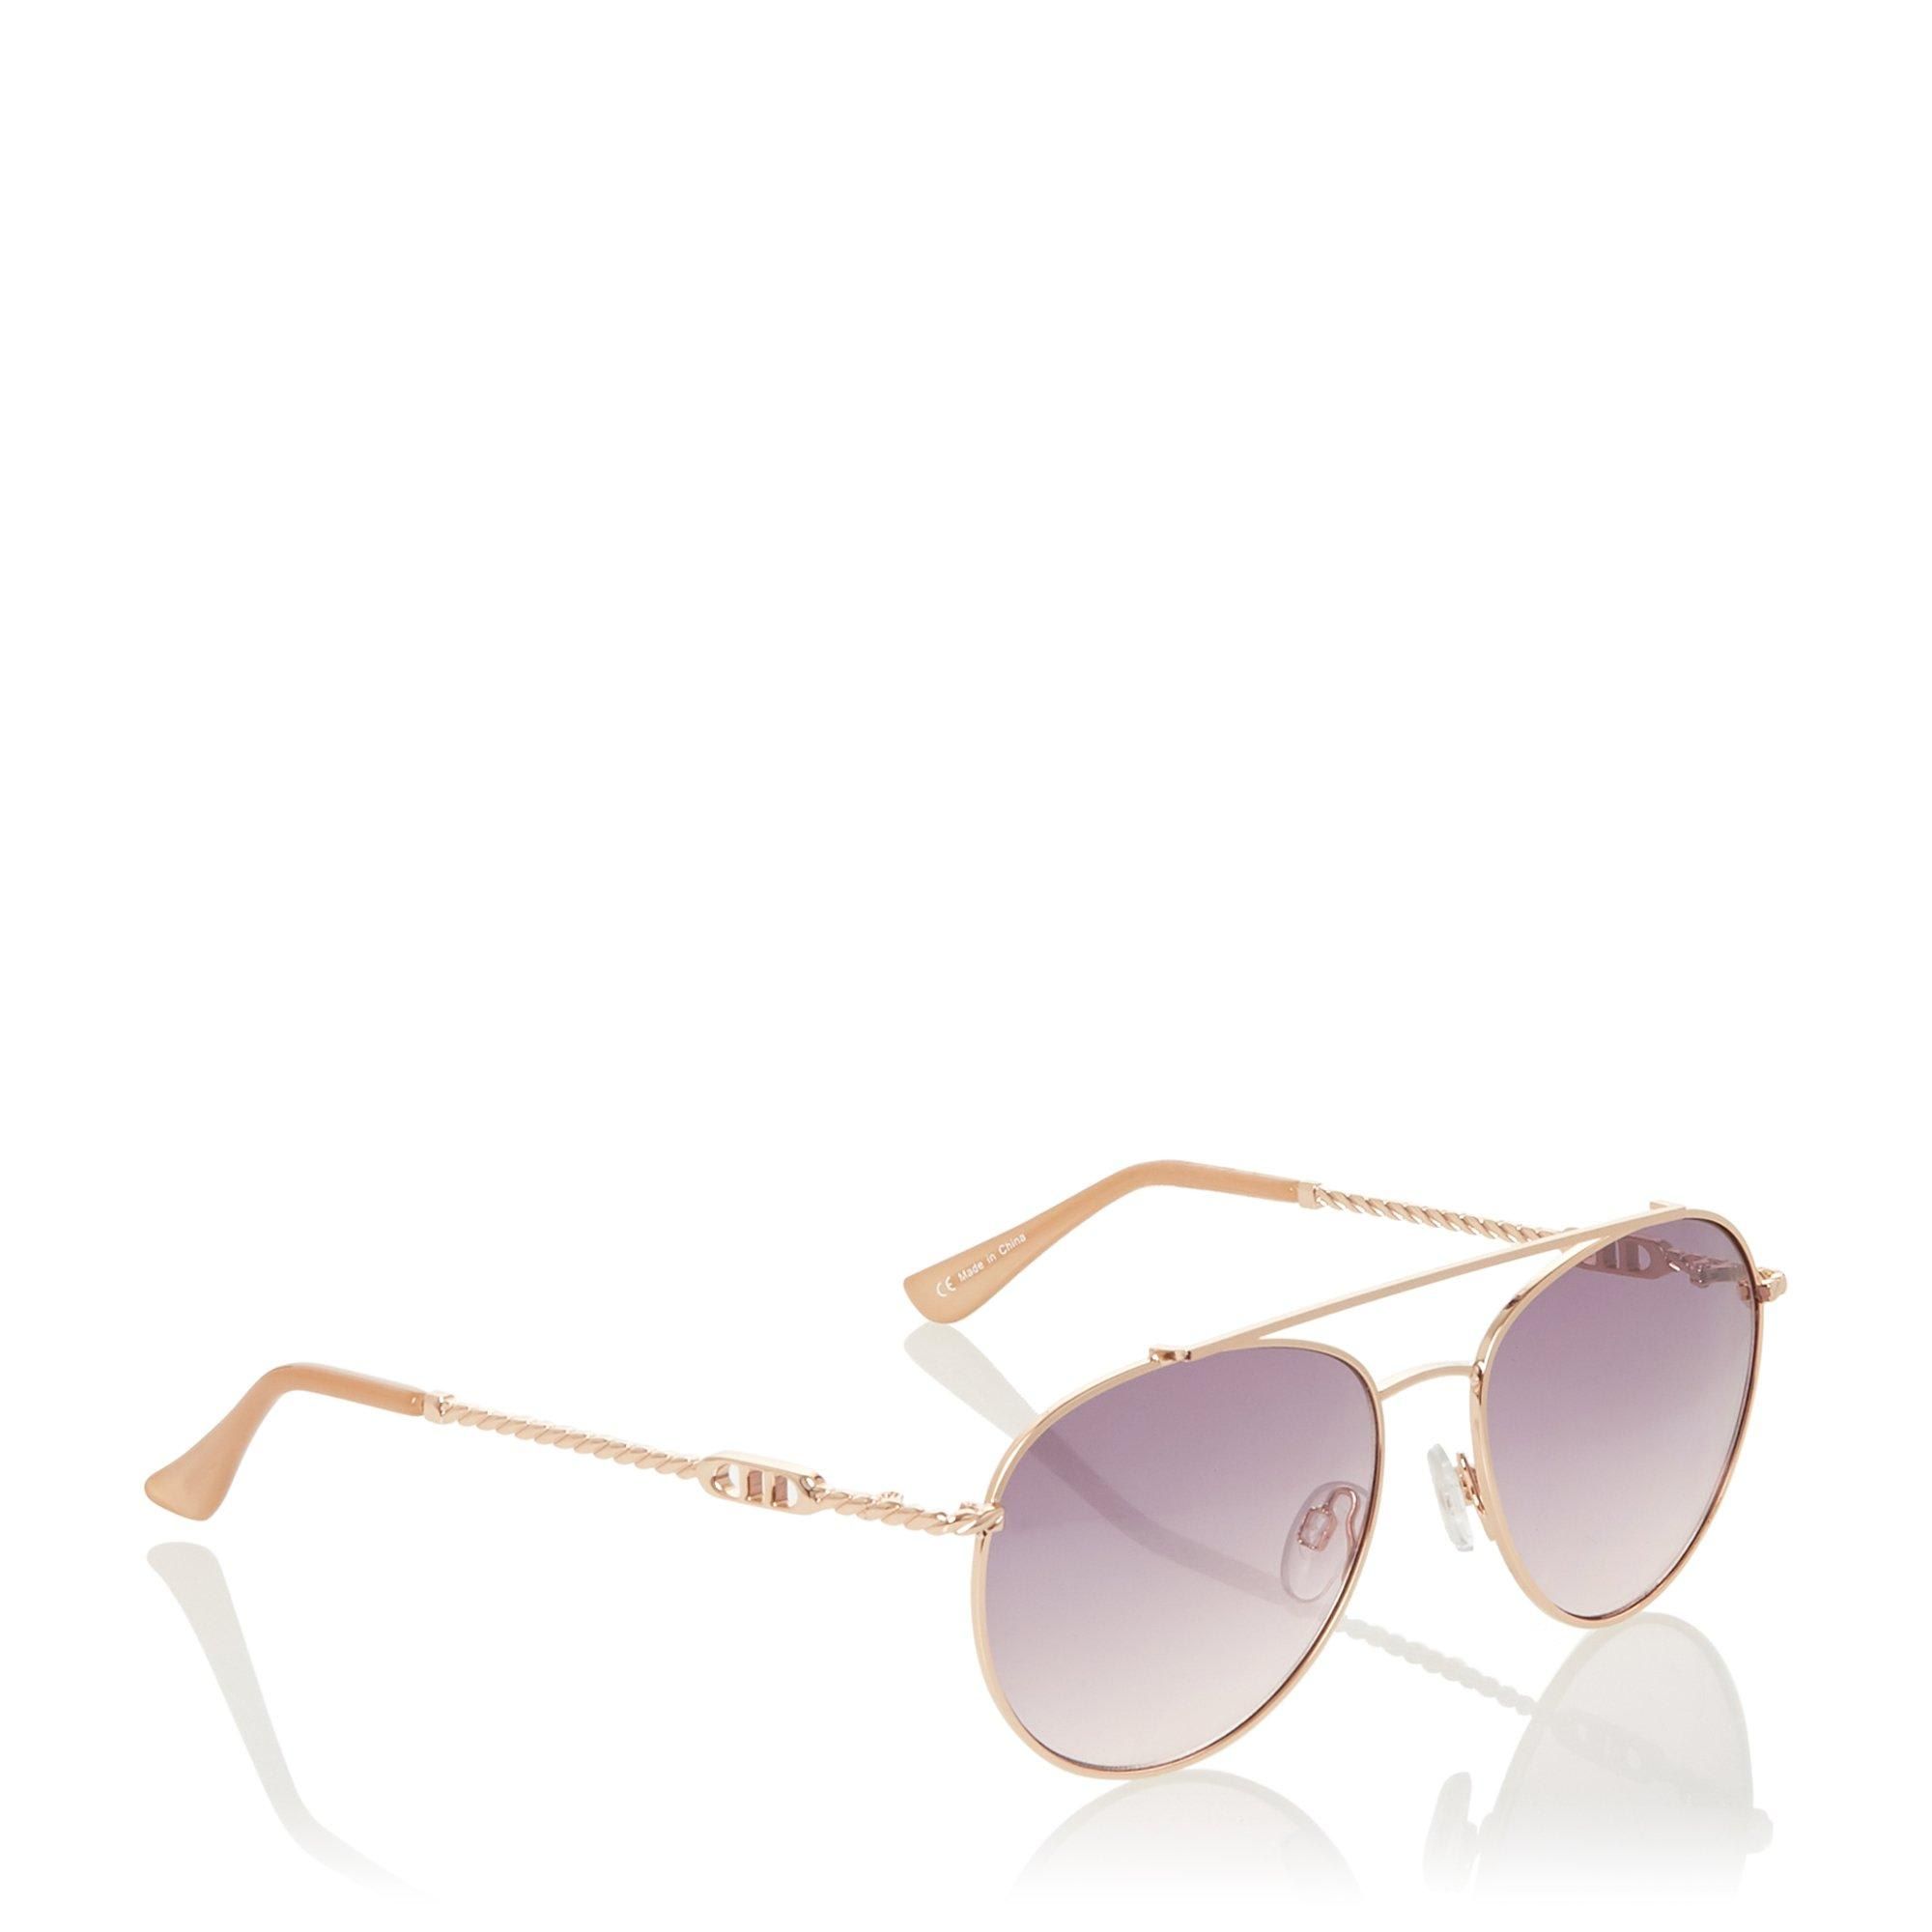 Complete your summer edits with these aviator sunglasses. With chic twisted metal arms that feature a signature brand detail. The lenses display a light smoke finish.